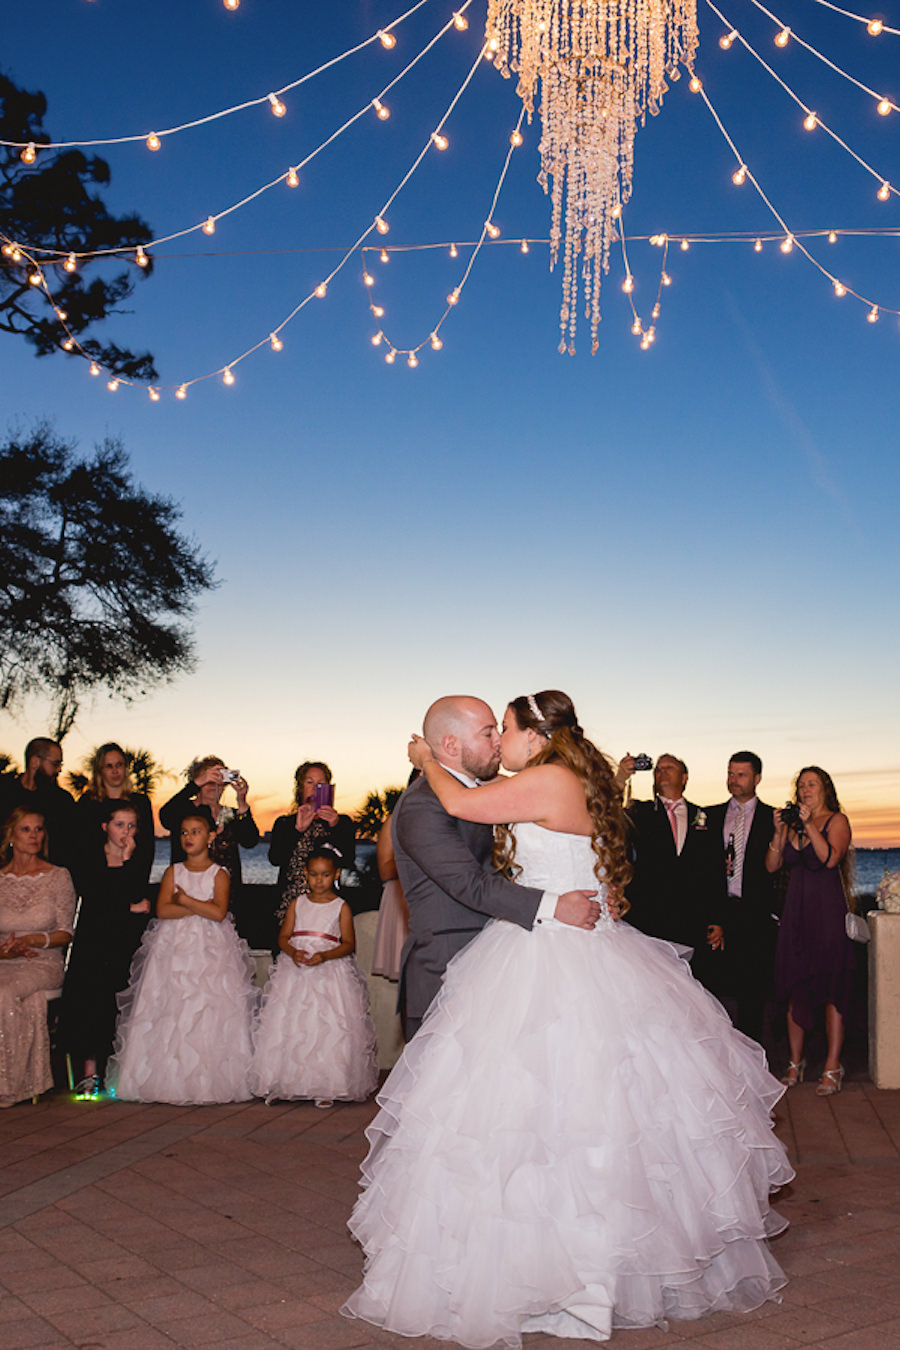 Bride and Groom Outdoor Nighttime First Dance Wedding Portrait | Sarasota Wedding Photographer Grind and Press Photography | Hair and Makeup Michele Renee The Studio